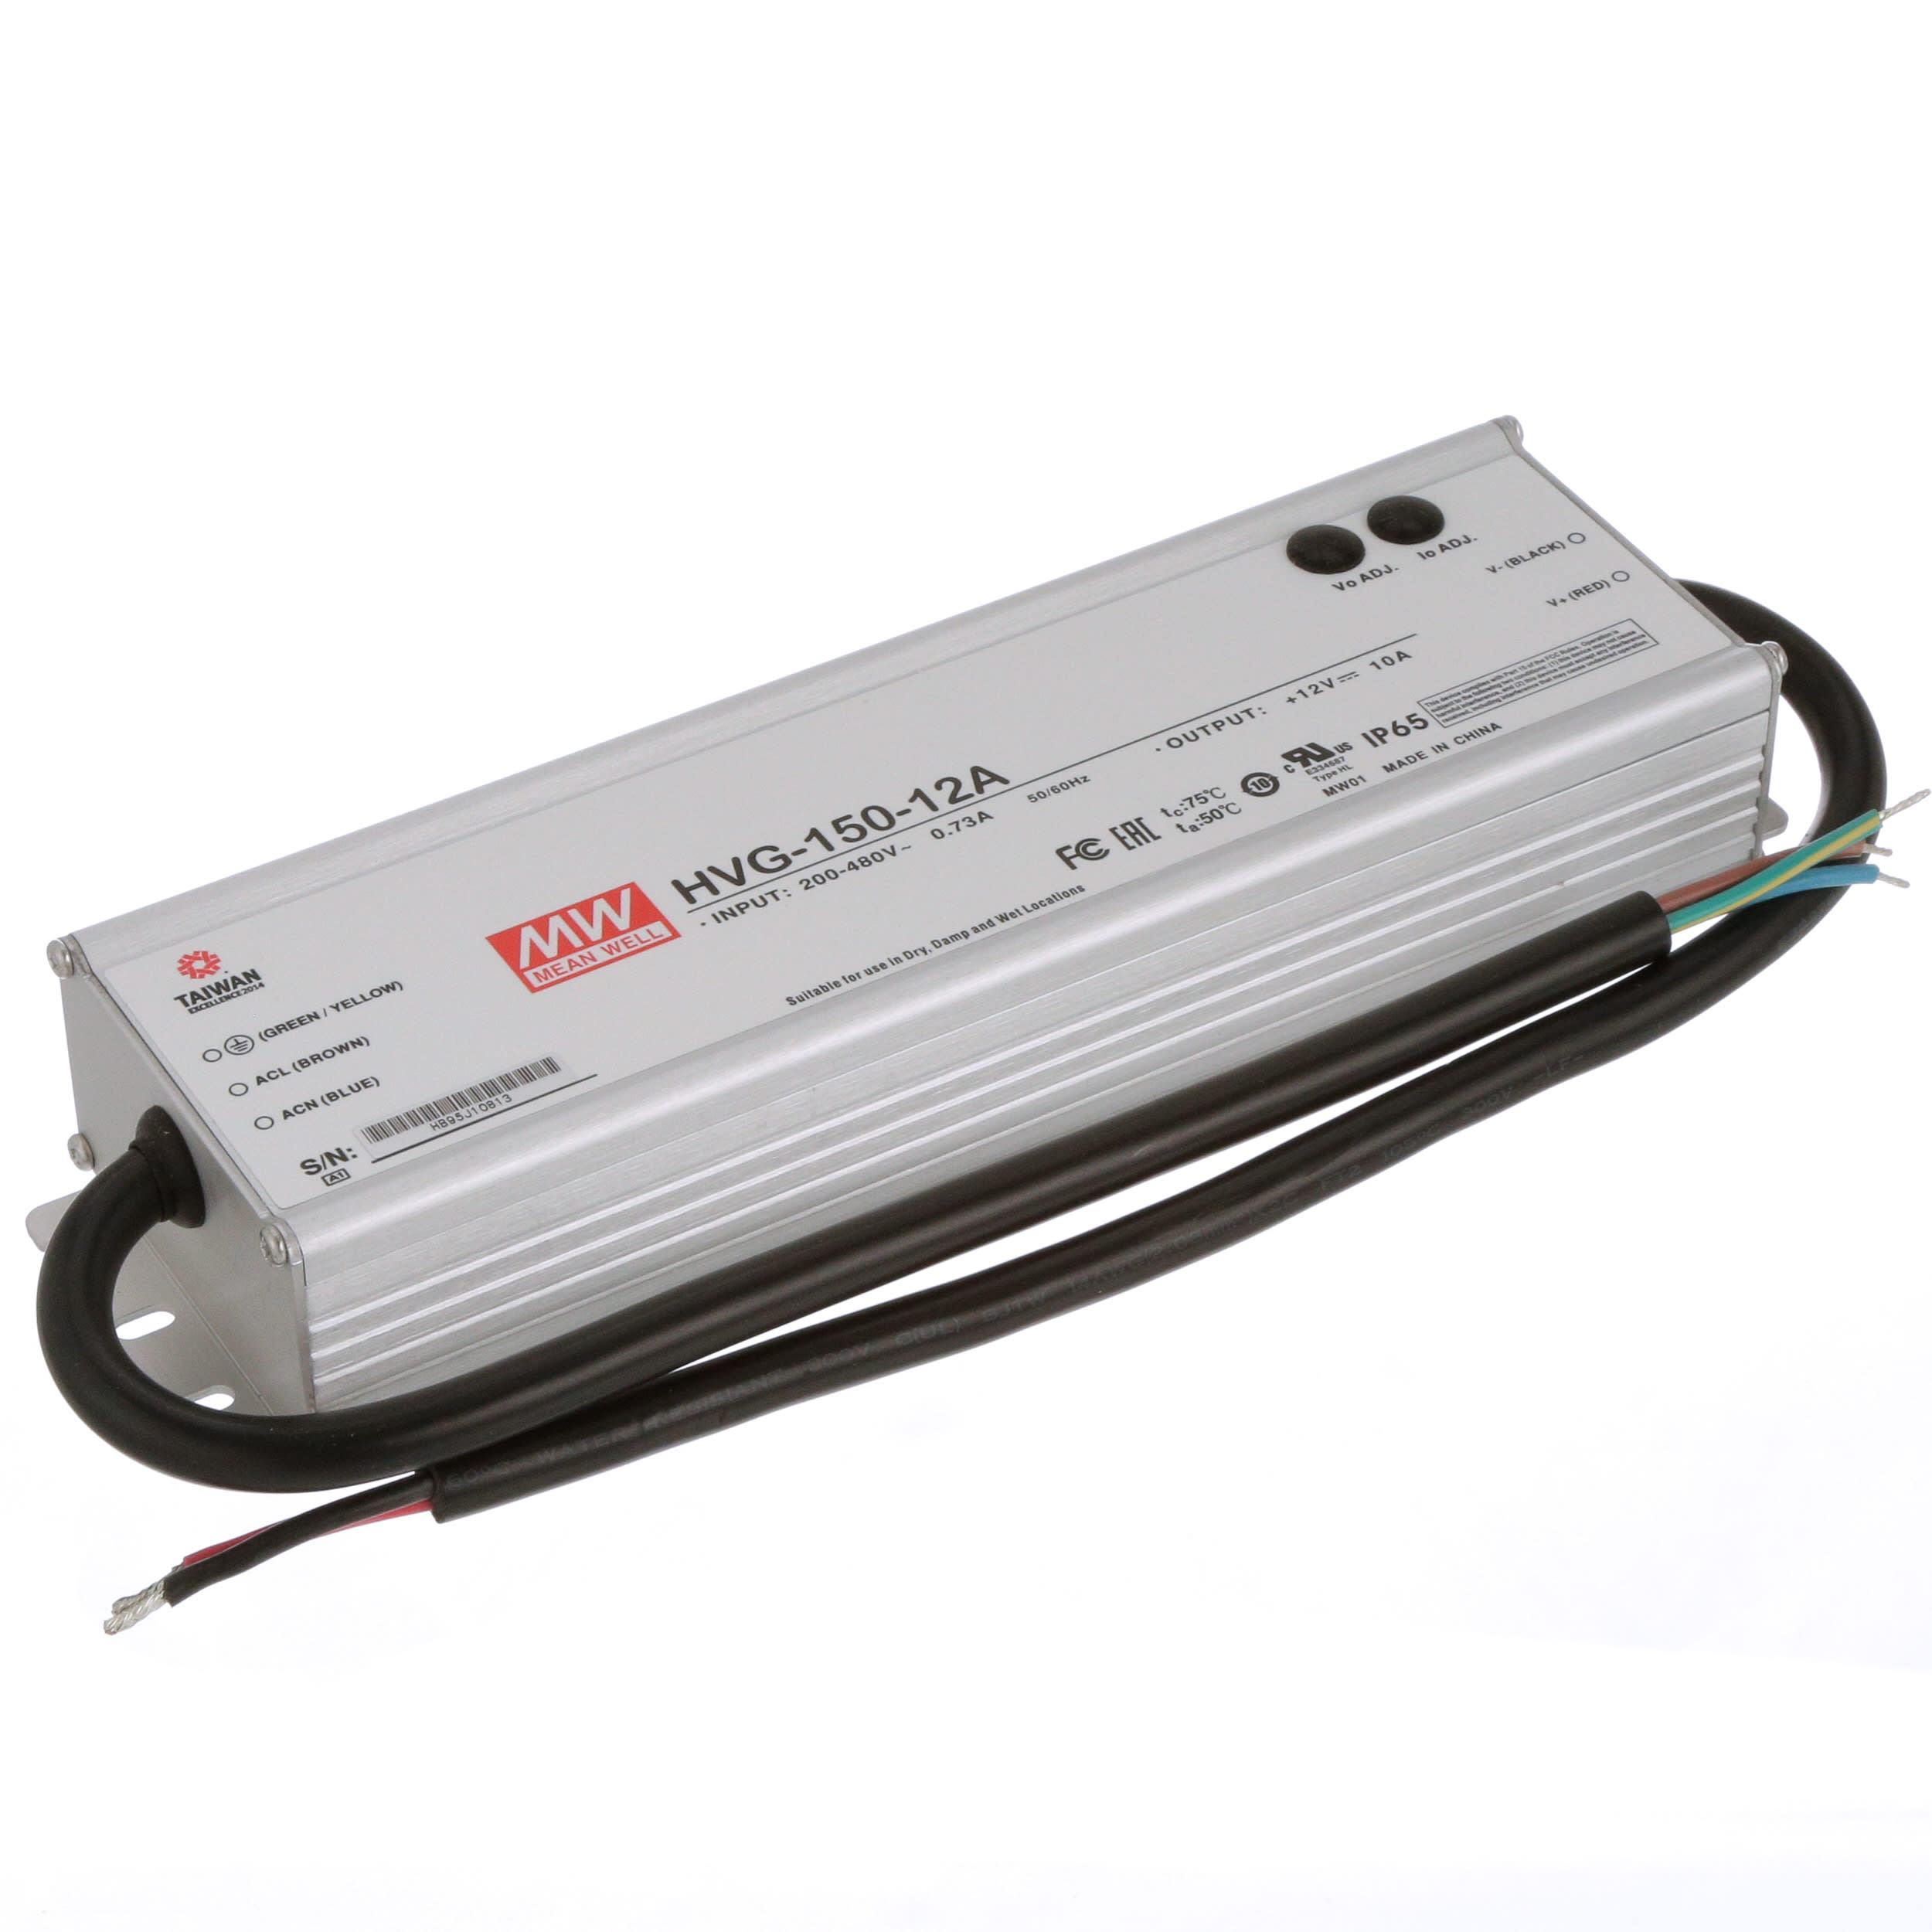 MEAN WELL - HVG-150-12A - Power Supply,AC-DC,12V,10A,200-528V In 